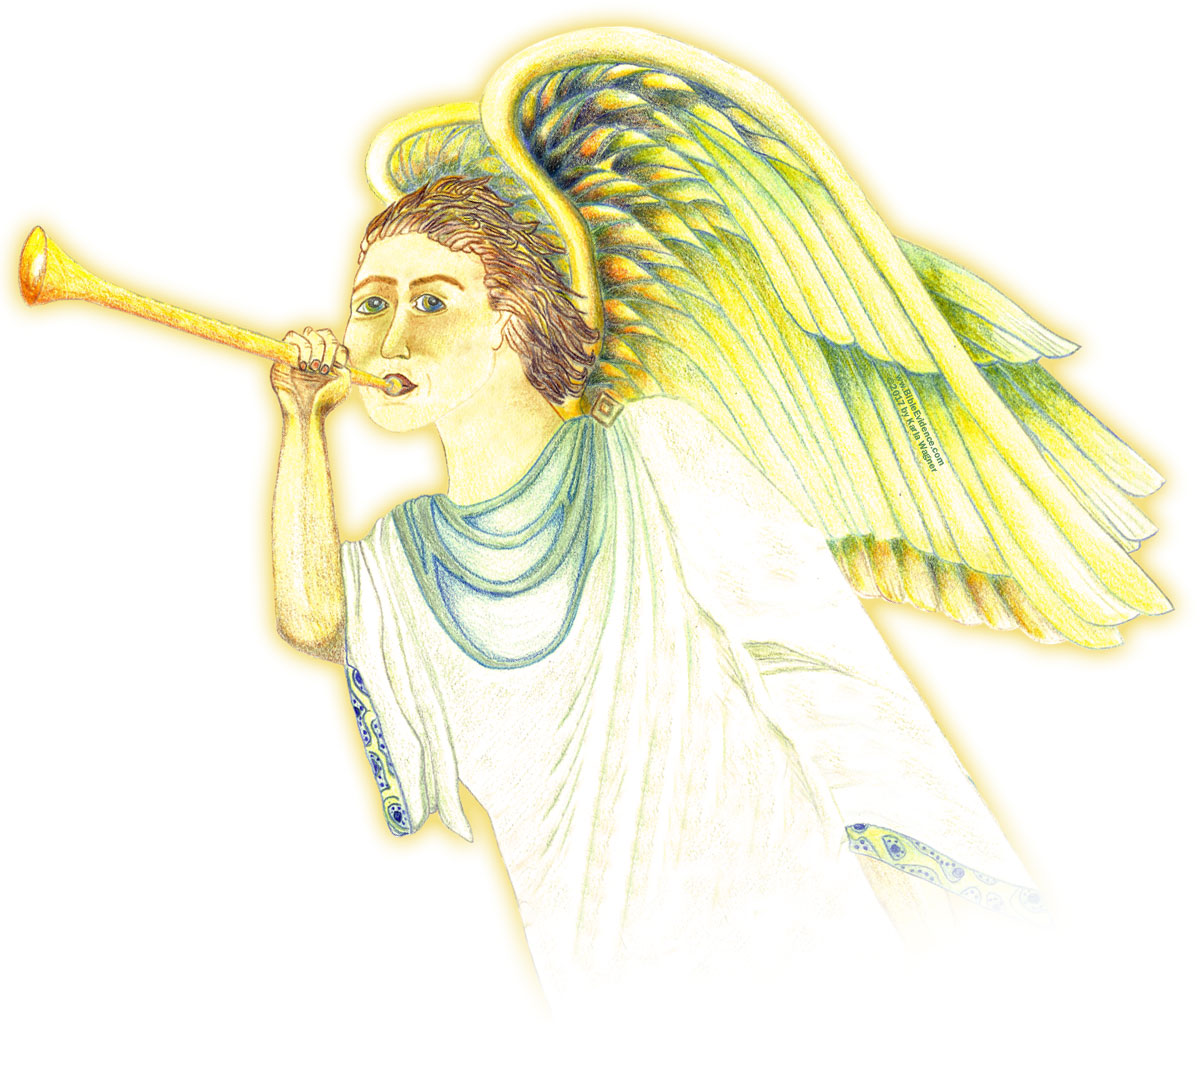 1st Angel of the 3 Angels' Messages